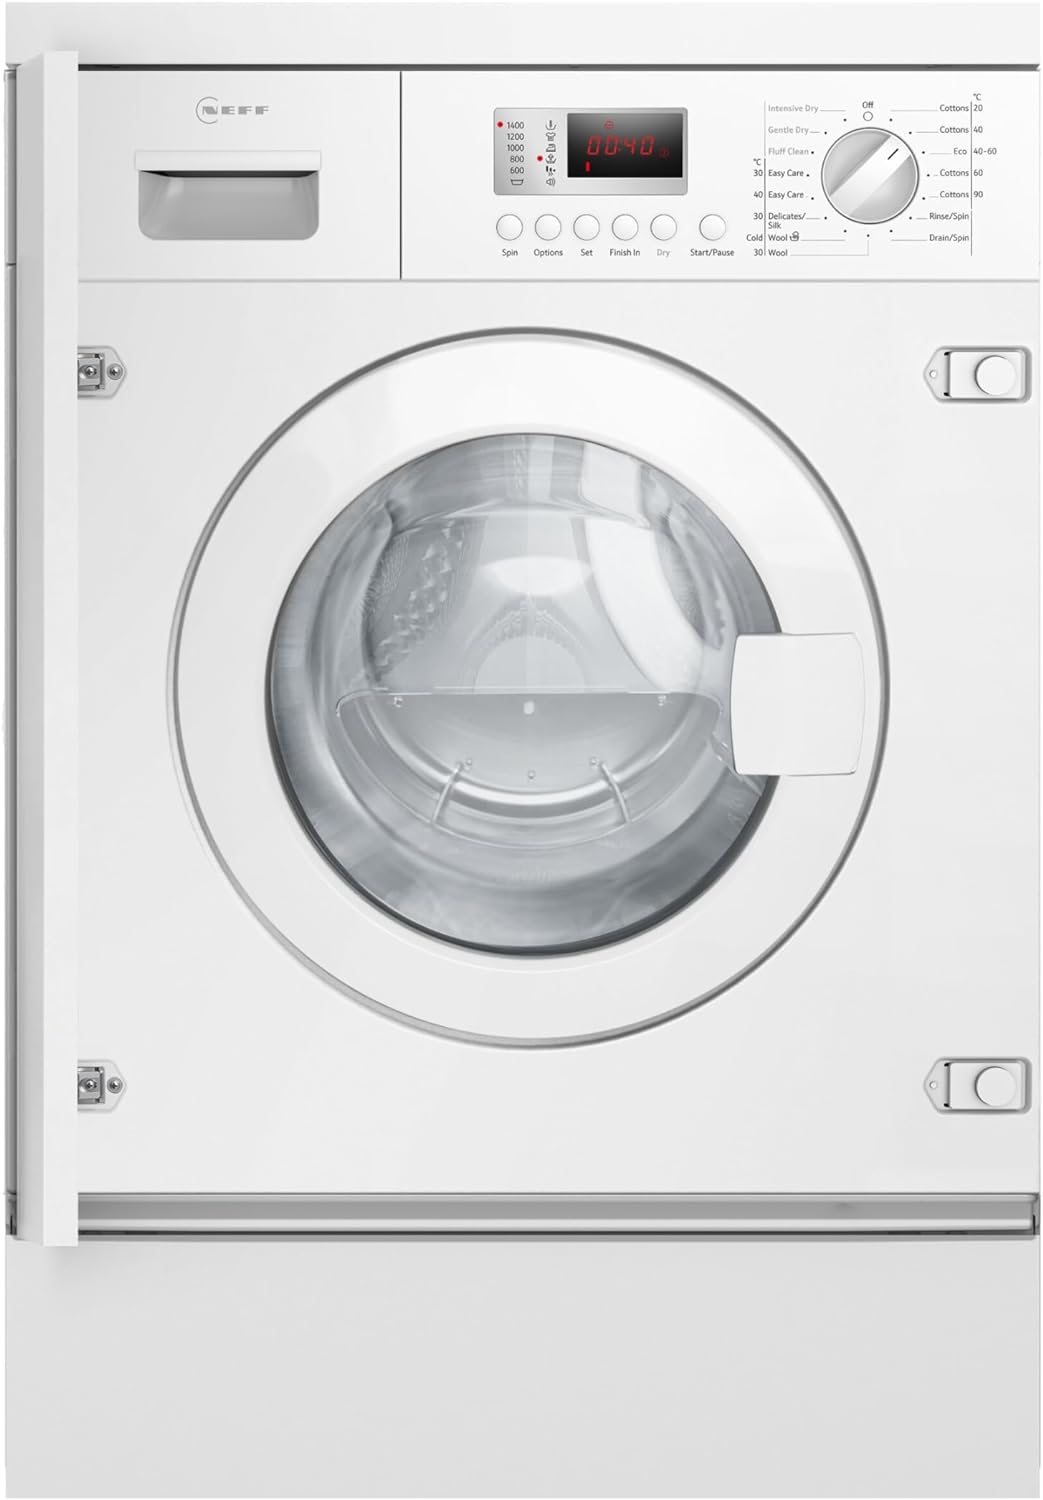 Neff V6320X2GB Built in Washer Dryer, 7kg wash / 4kg dry capacity, 1400rpm, Time delat/Time remaining, LED Display, White - Amazing Gadgets Outlet